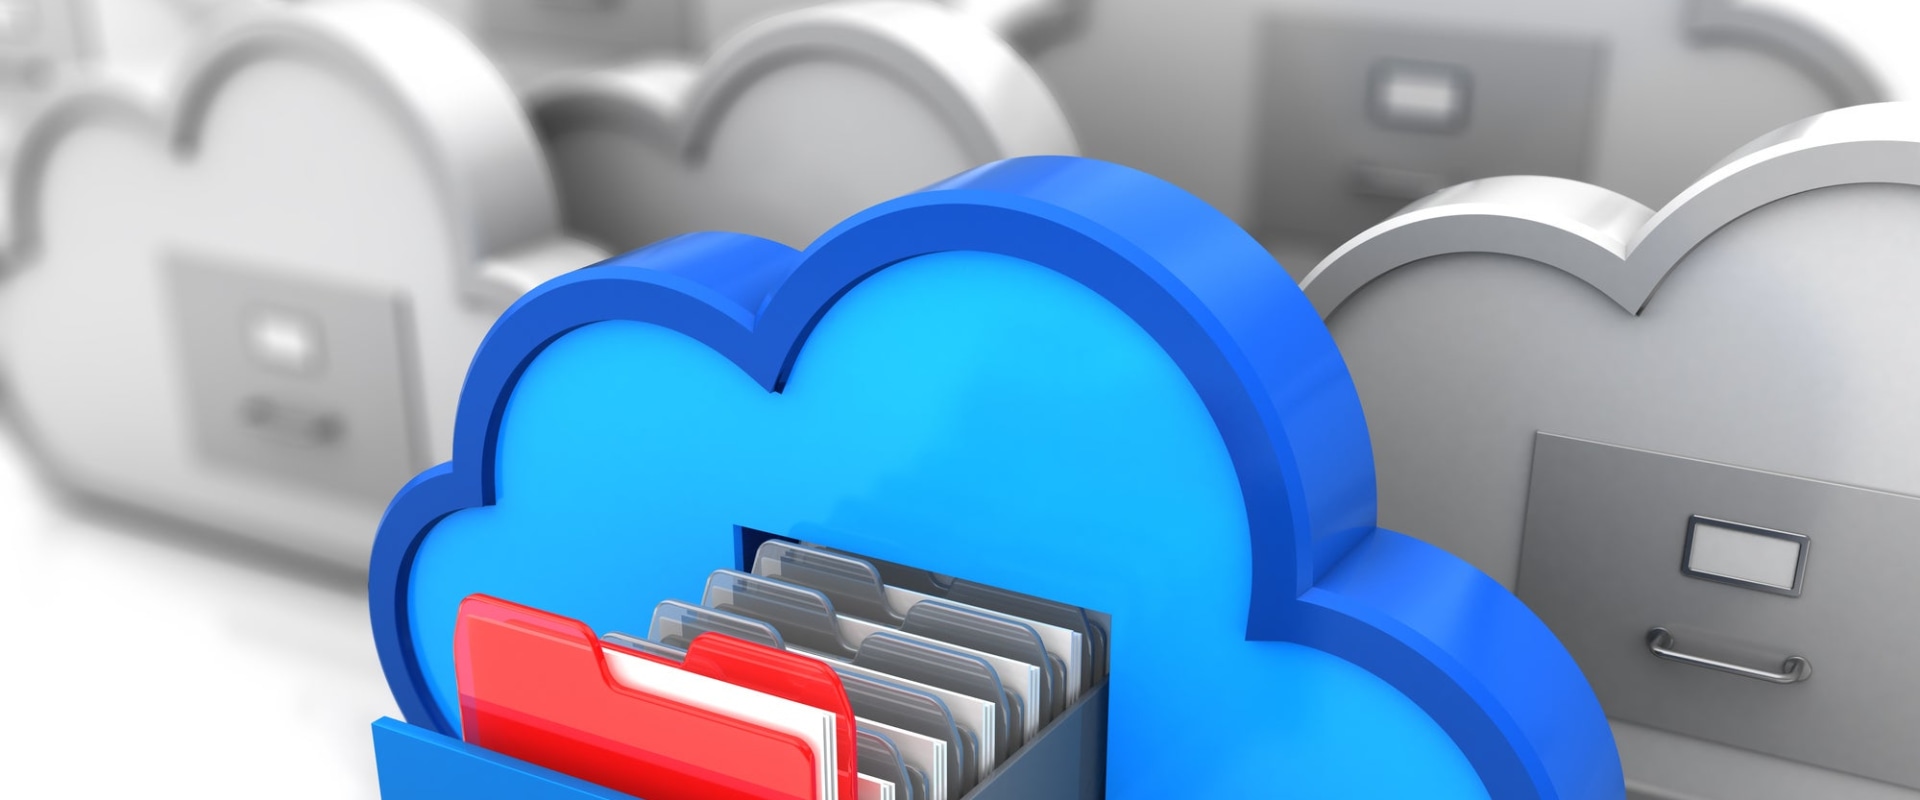 How Cloud Storage Capacity Can Benefit You